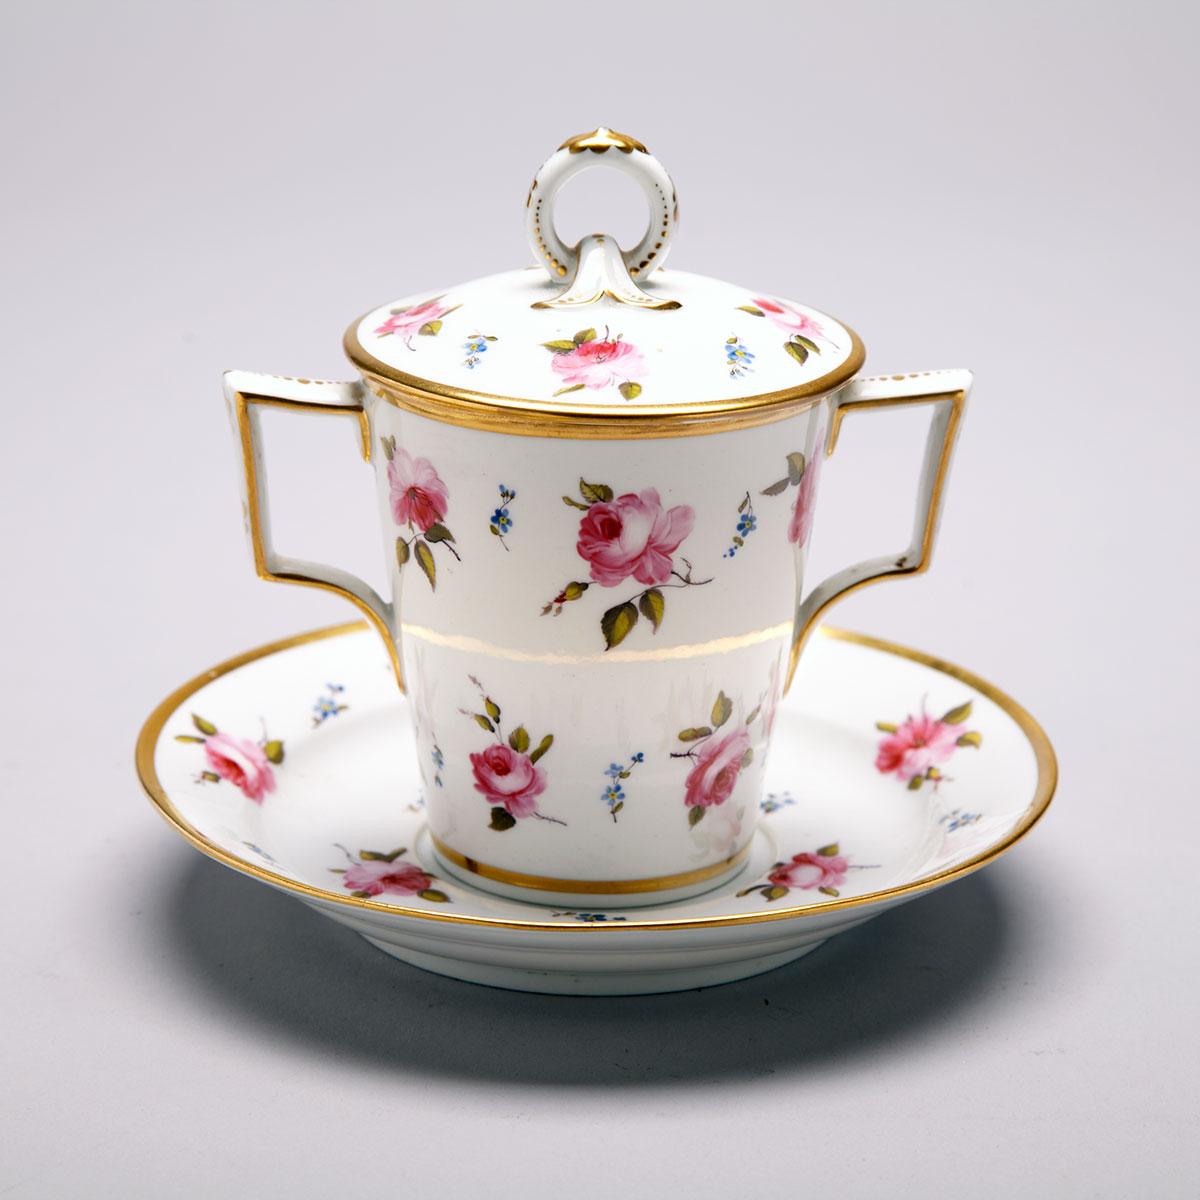 Barr, Flight & Barr Worcester Chocolate Cup with Cover and Stand, c.1810